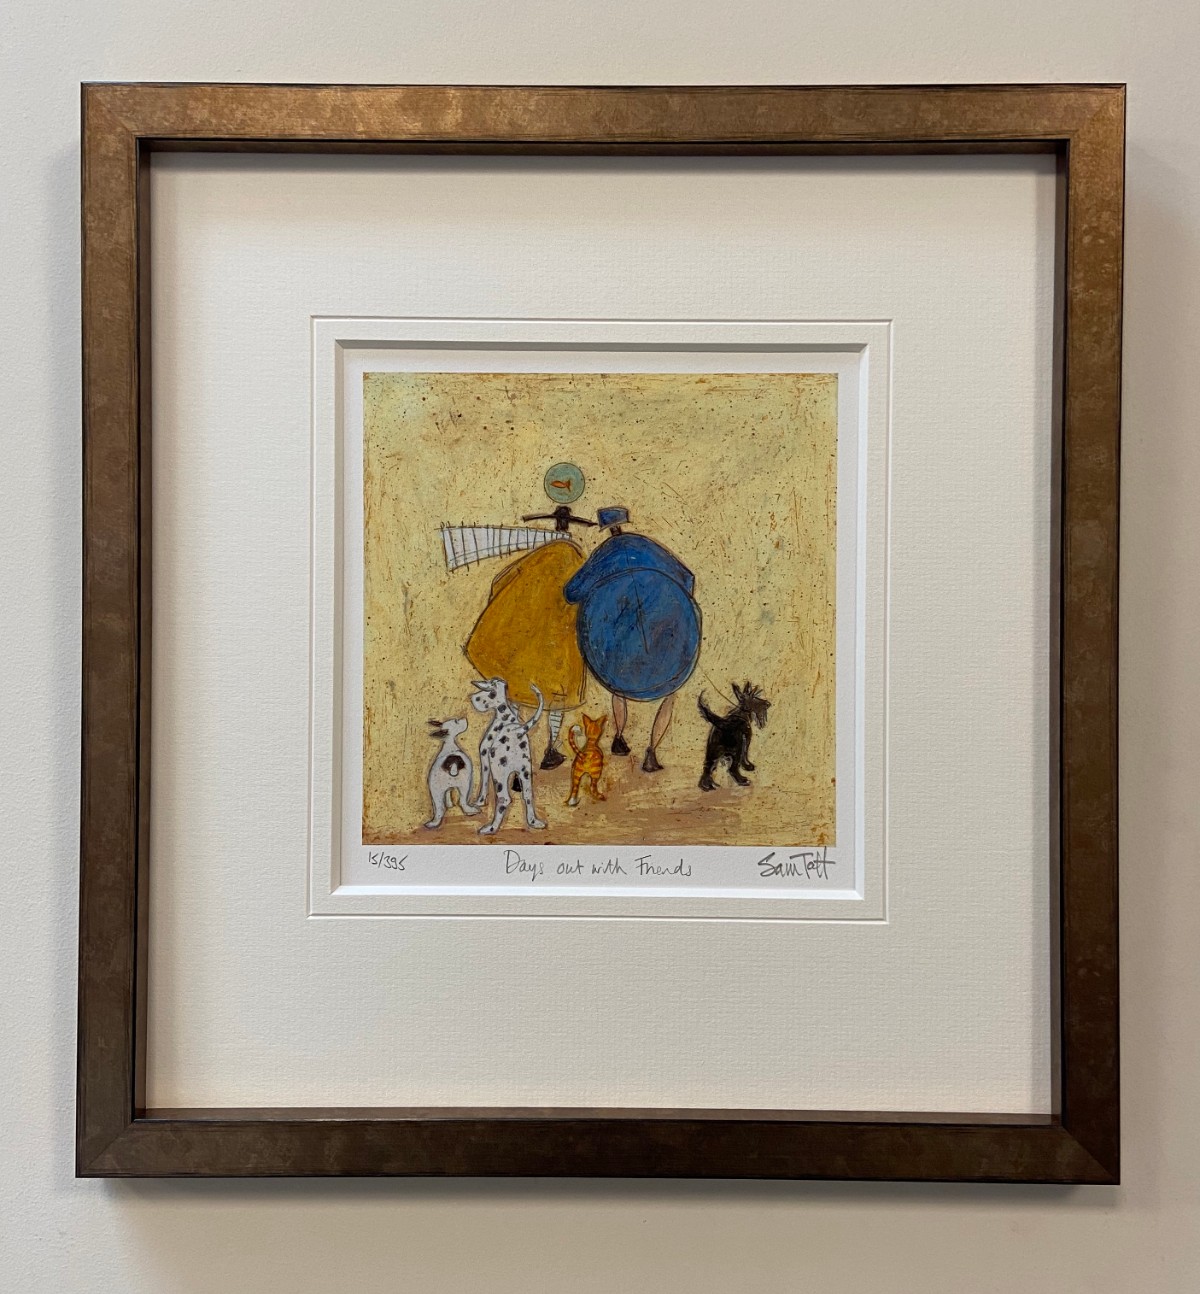 Days out with Friends by Sam Toft